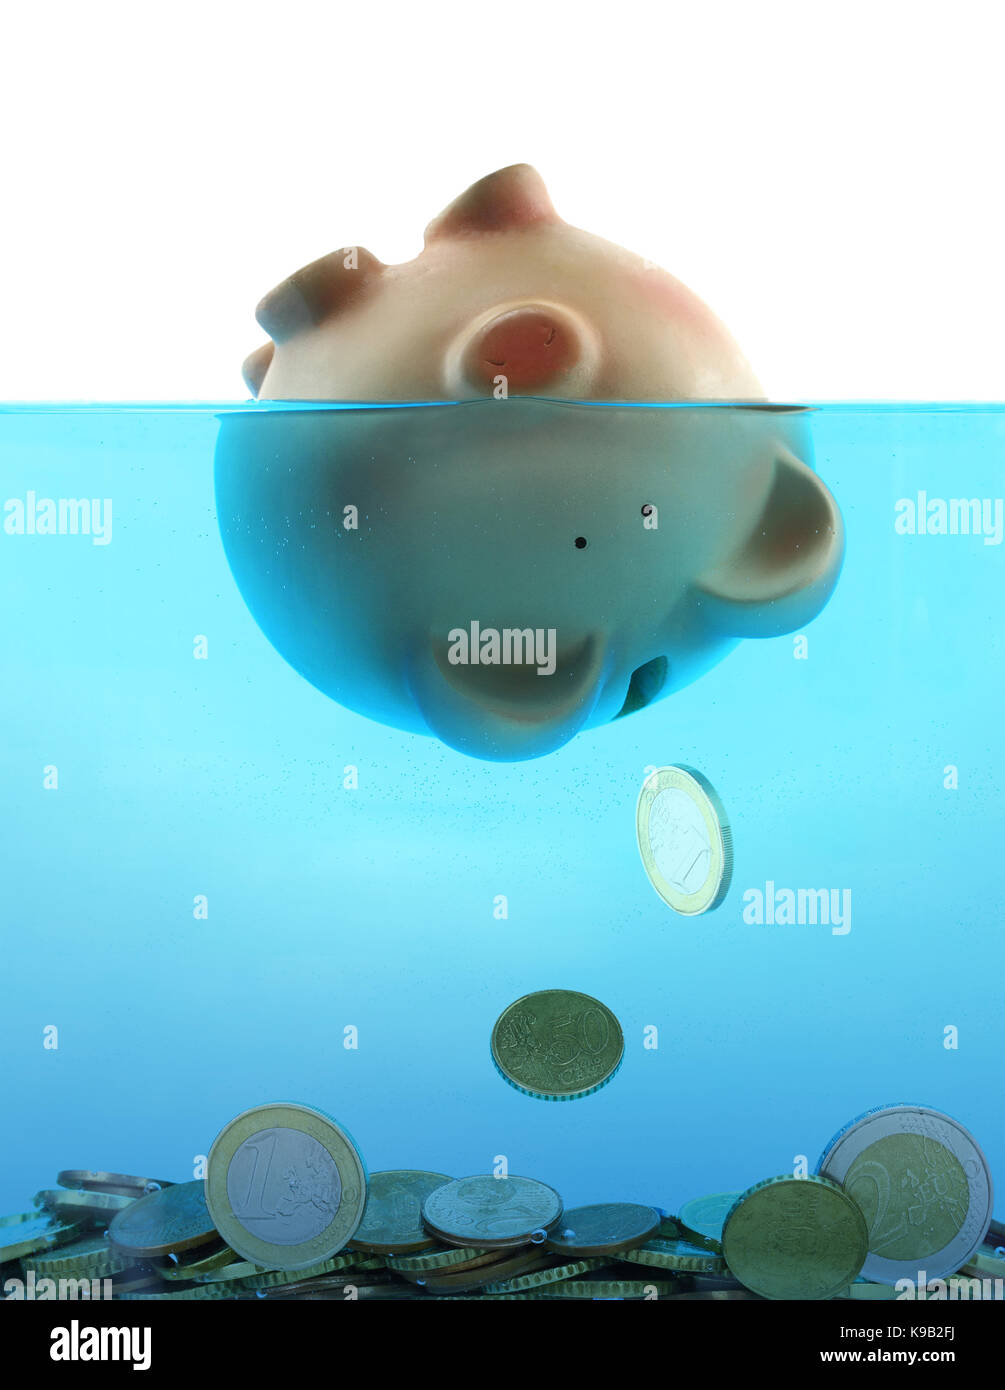 Drowning in debt represented by a piggy bank sinking in blue water Stock Photo